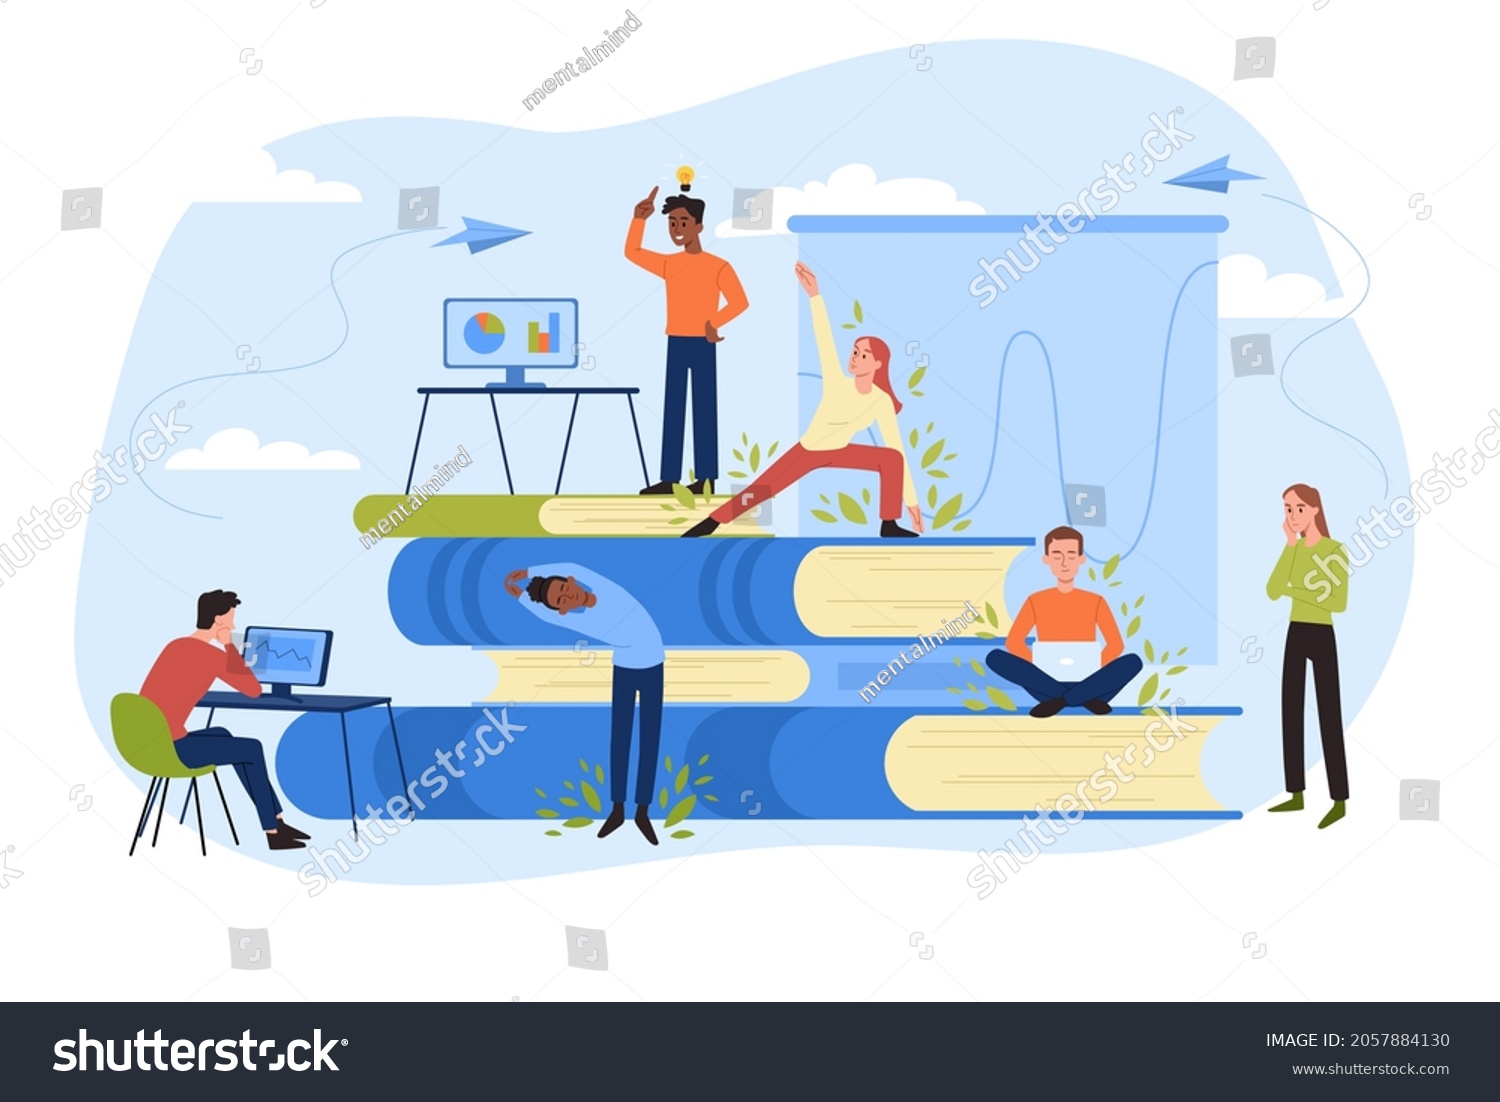 SVG of Break at work concept. Employees sit on books, meditate, do yoga and think about project. Taking care of mental and physical health. Cartoon flat vector illustration isolated on white background svg